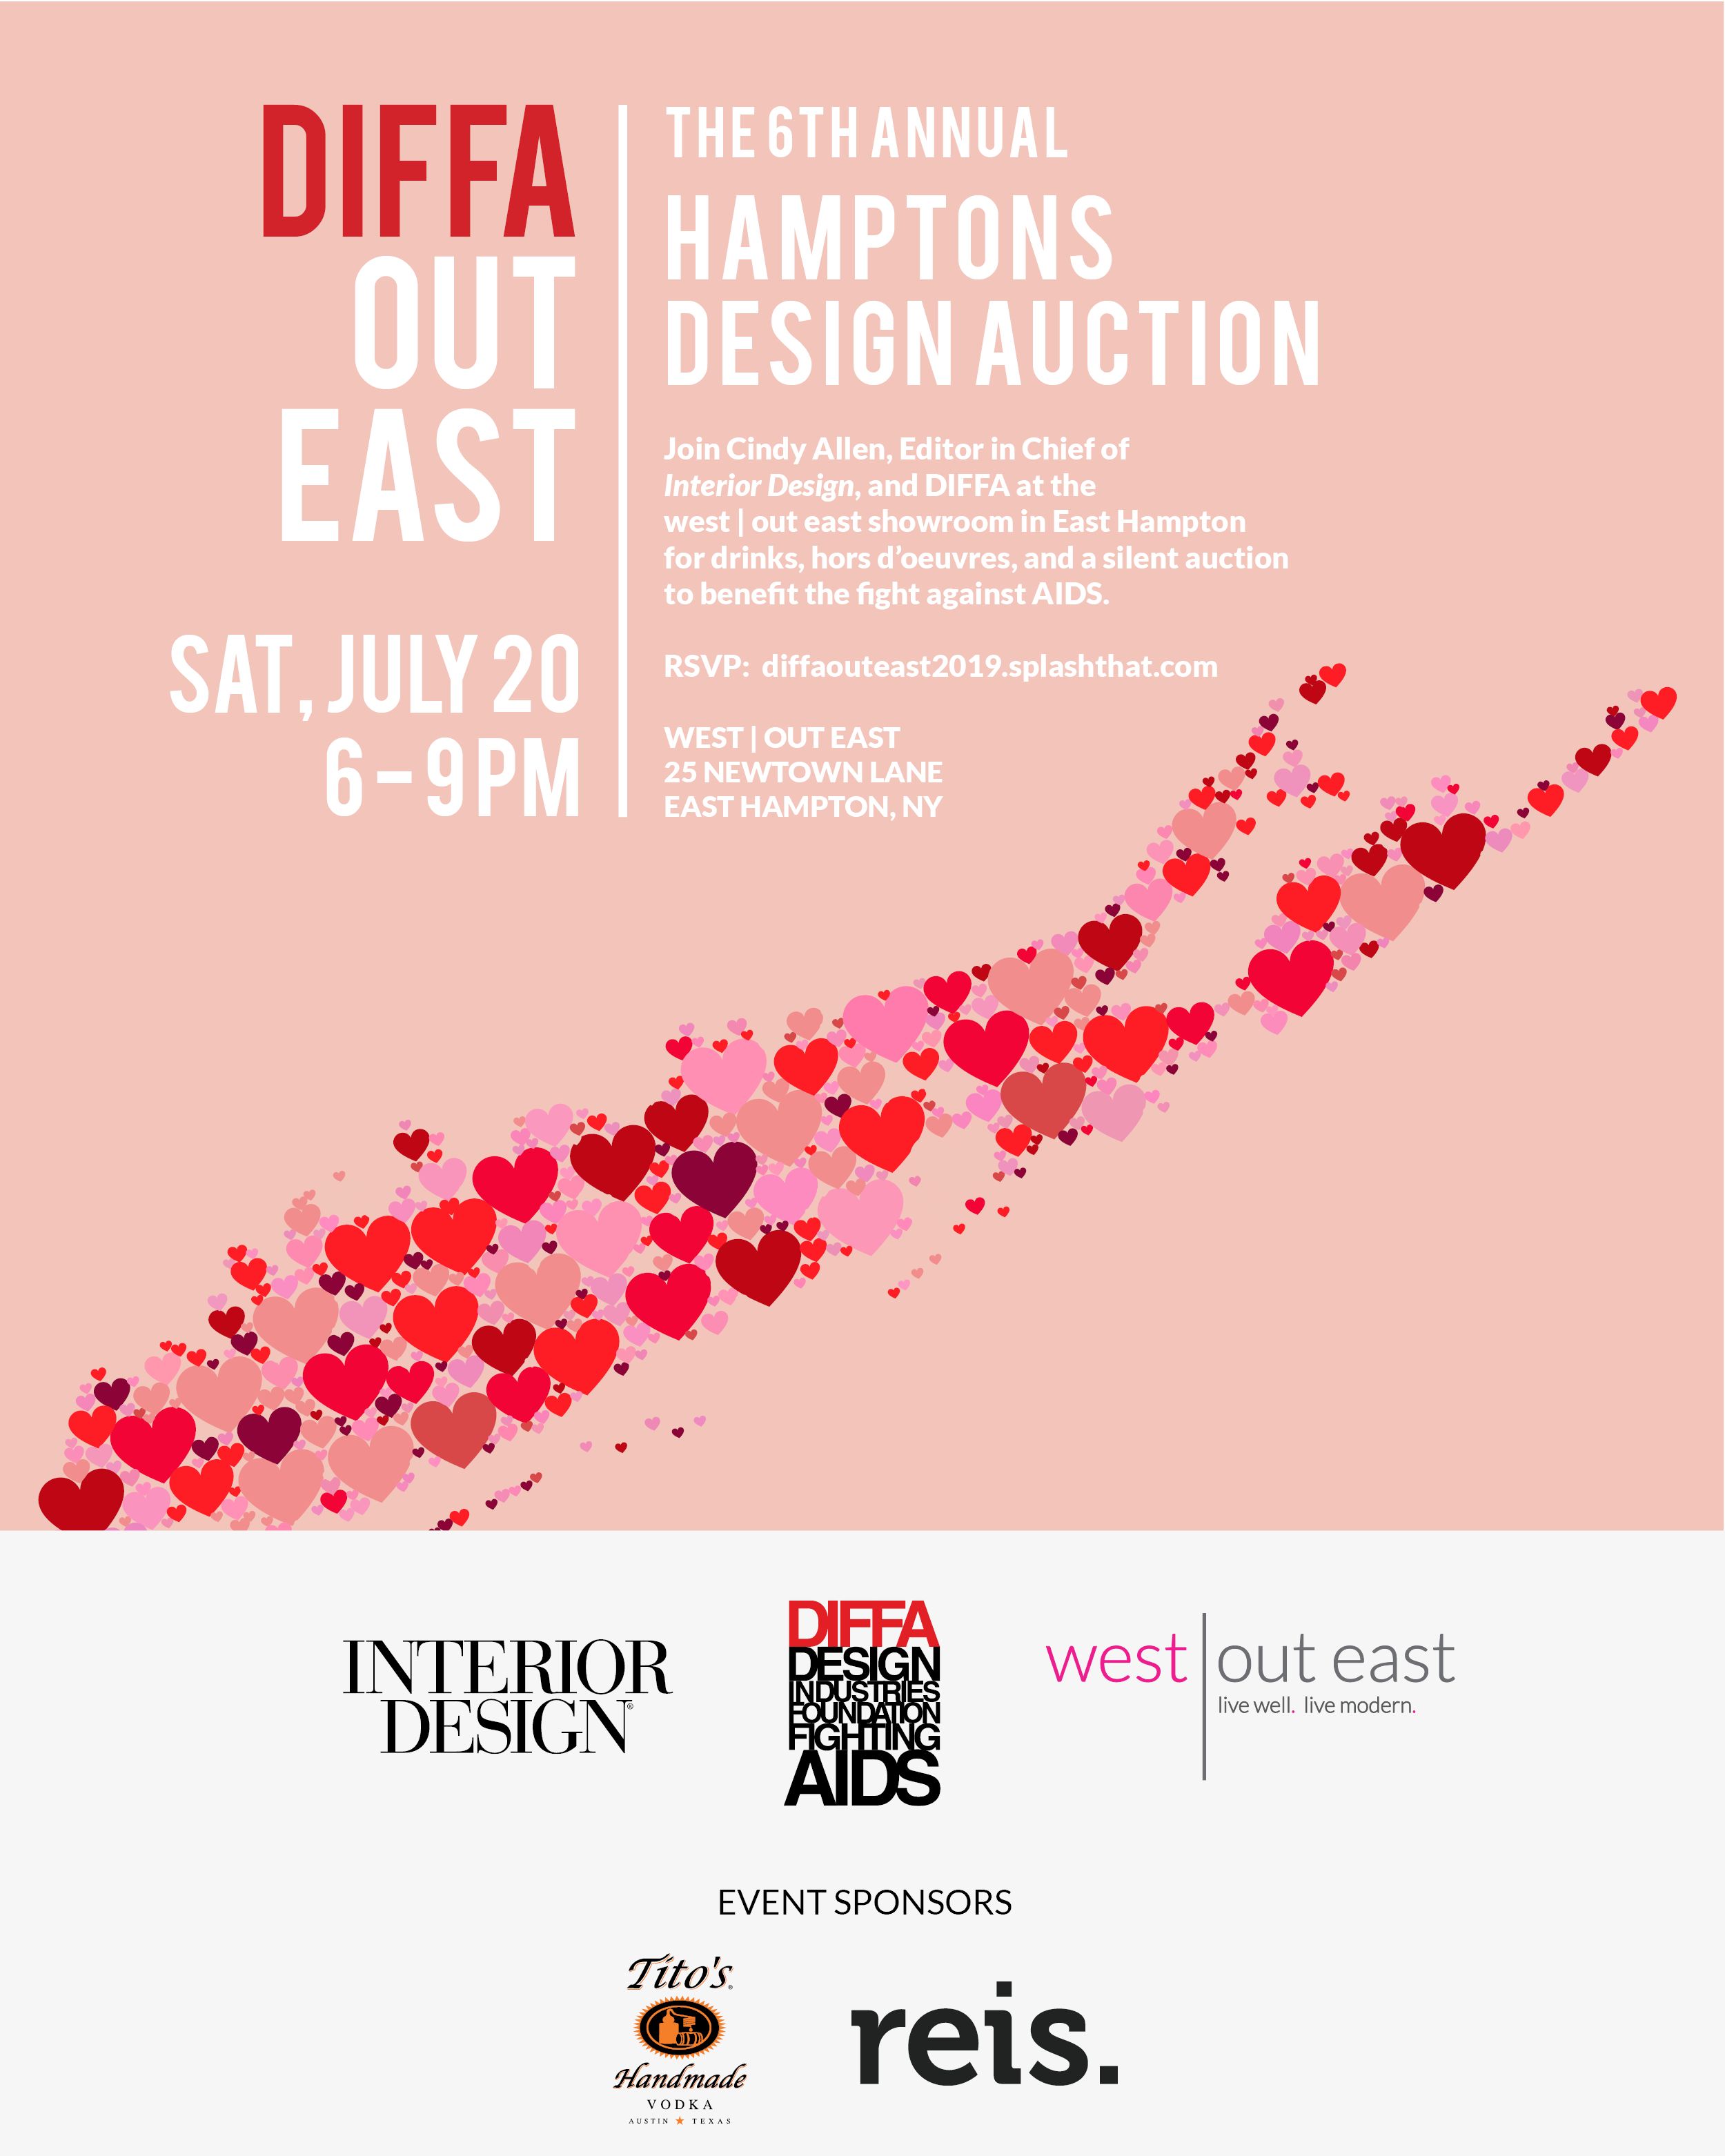 Join us for DIFFA Out East!